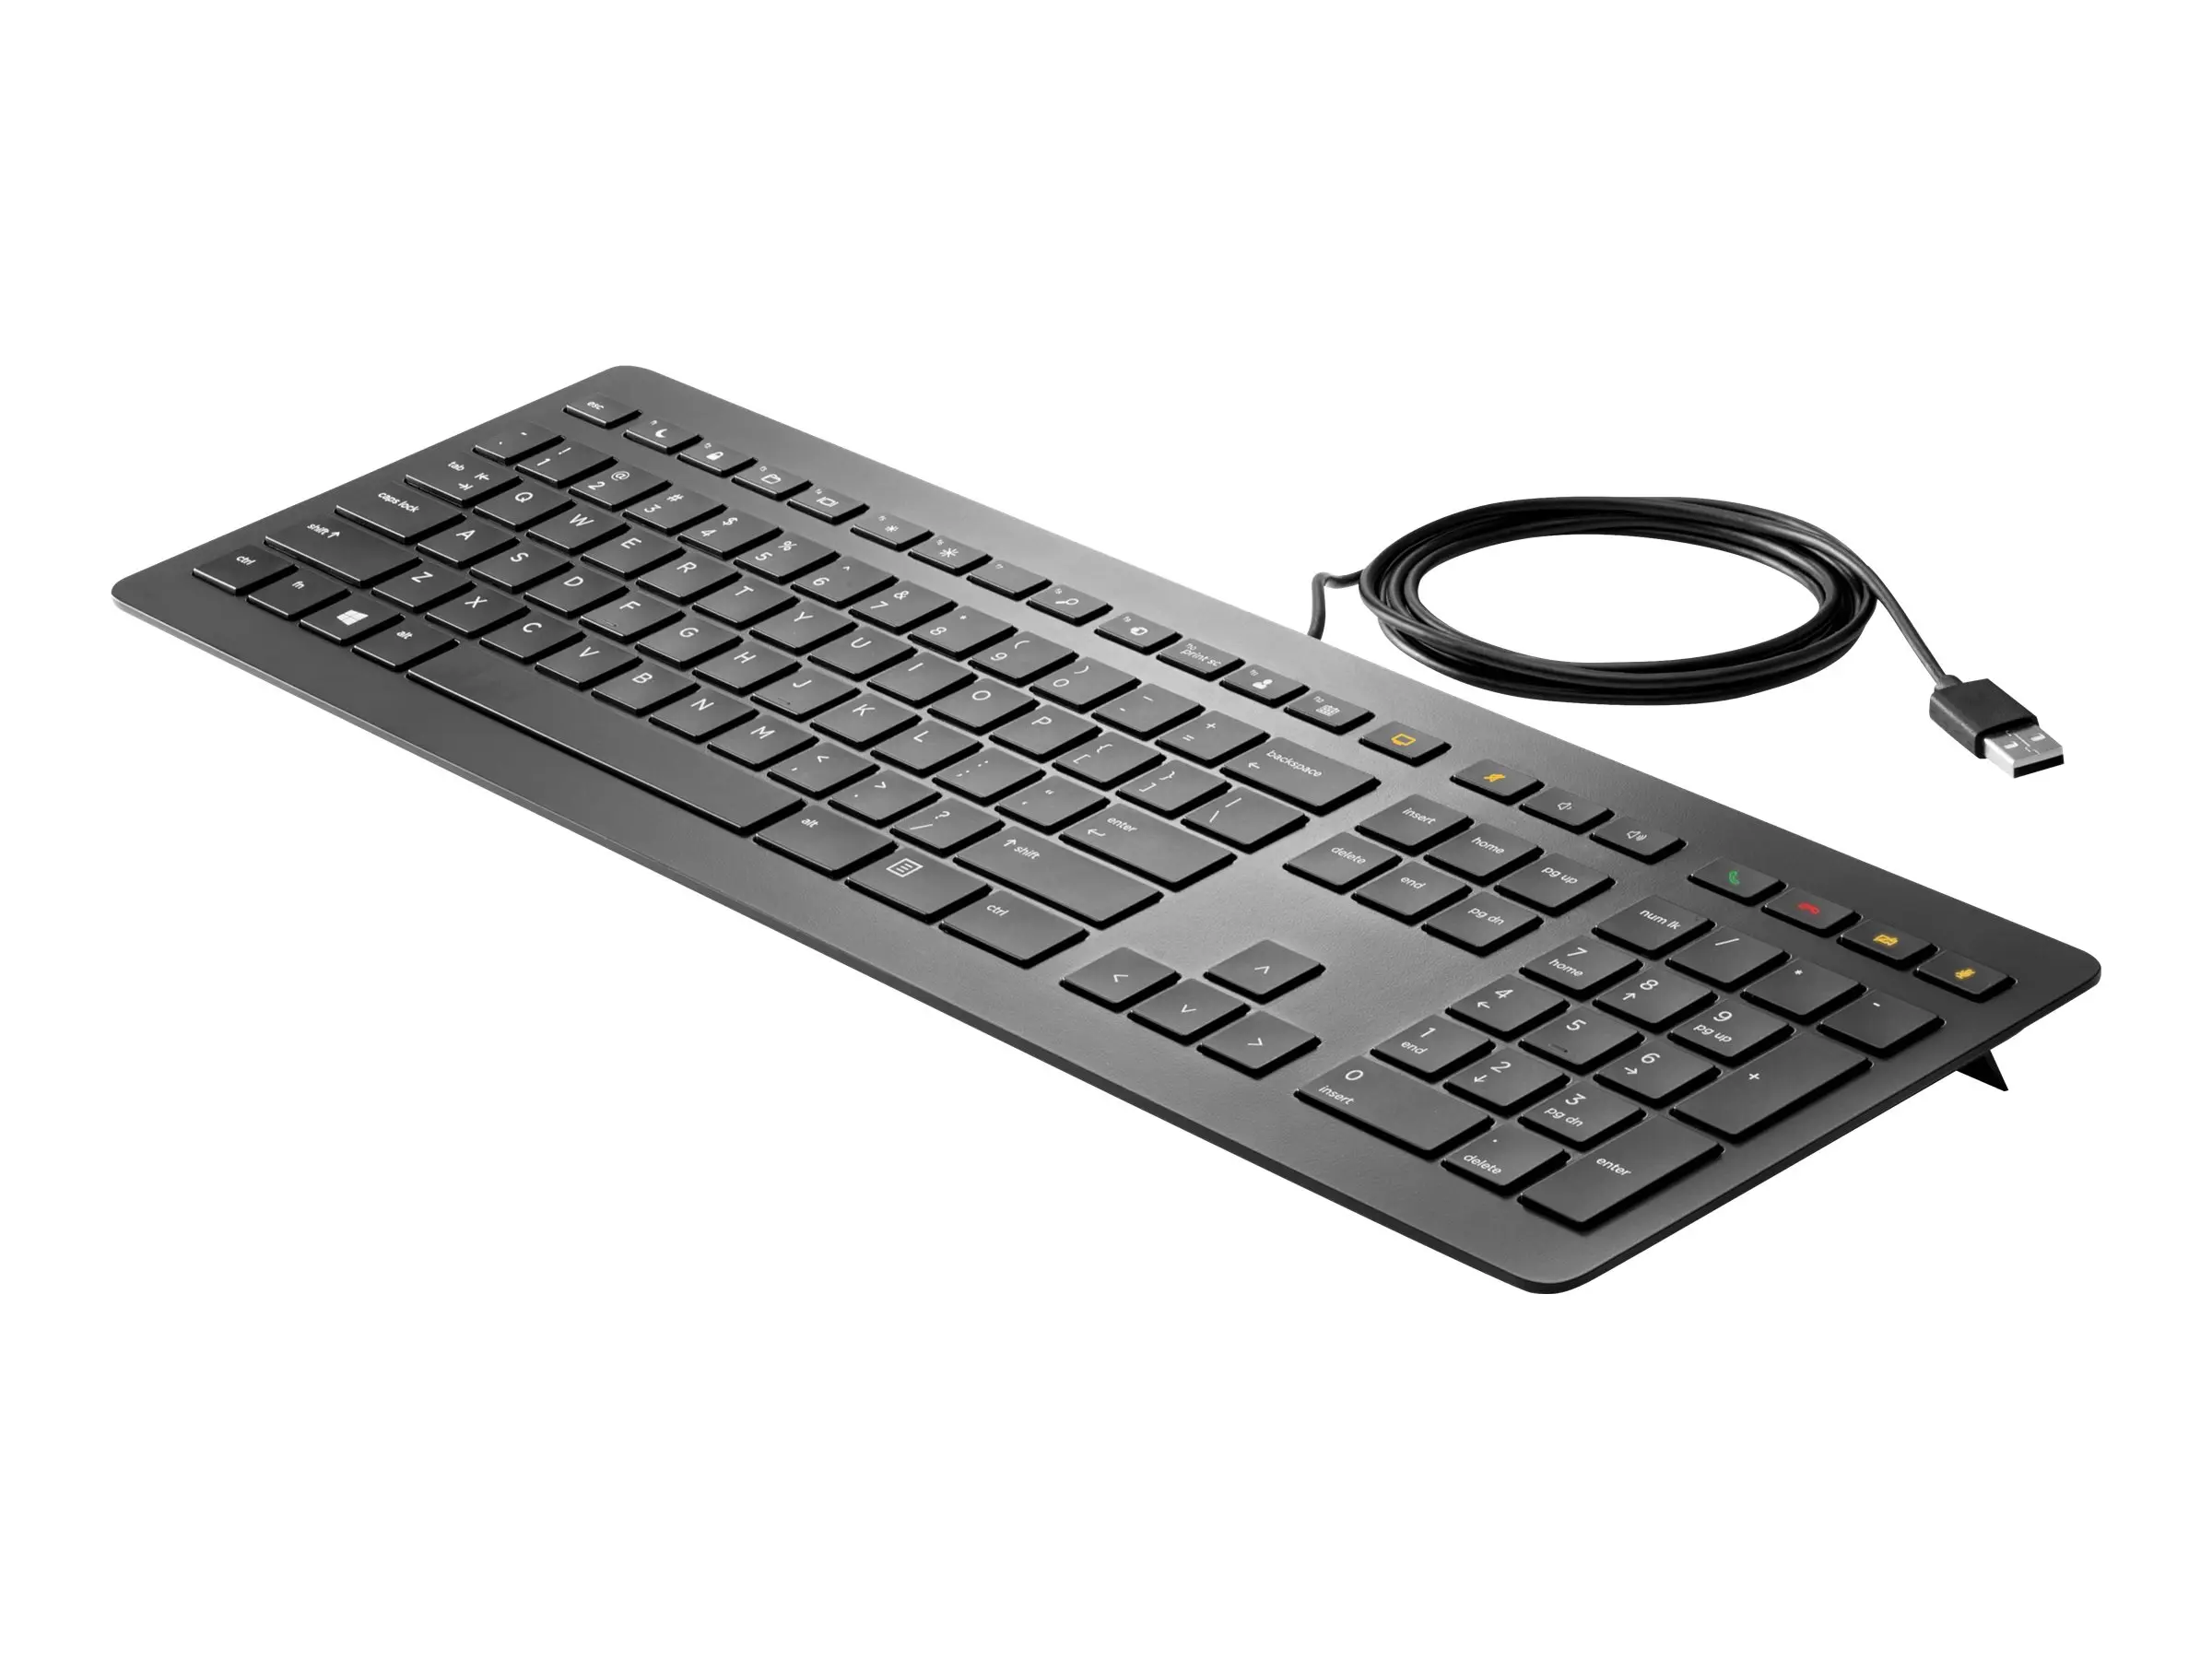 hewlett packard keyboard key to ouput to projector - What is the ShortCut key for projector display